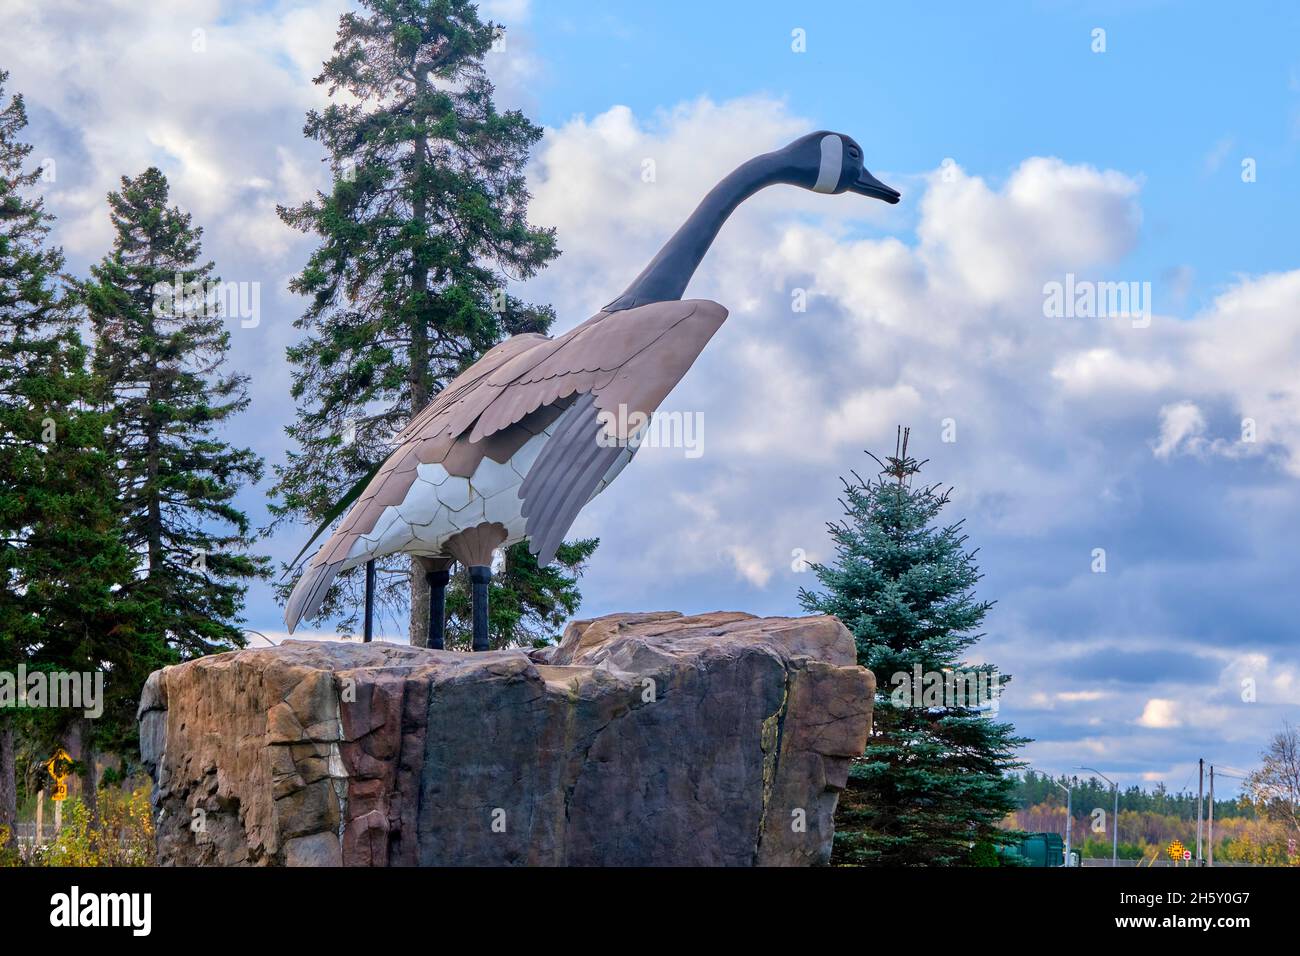 The ever popular Wawa Canada Goose statue is located at the visitor information centre in Wawa Ontario, Canada. Stock Photo